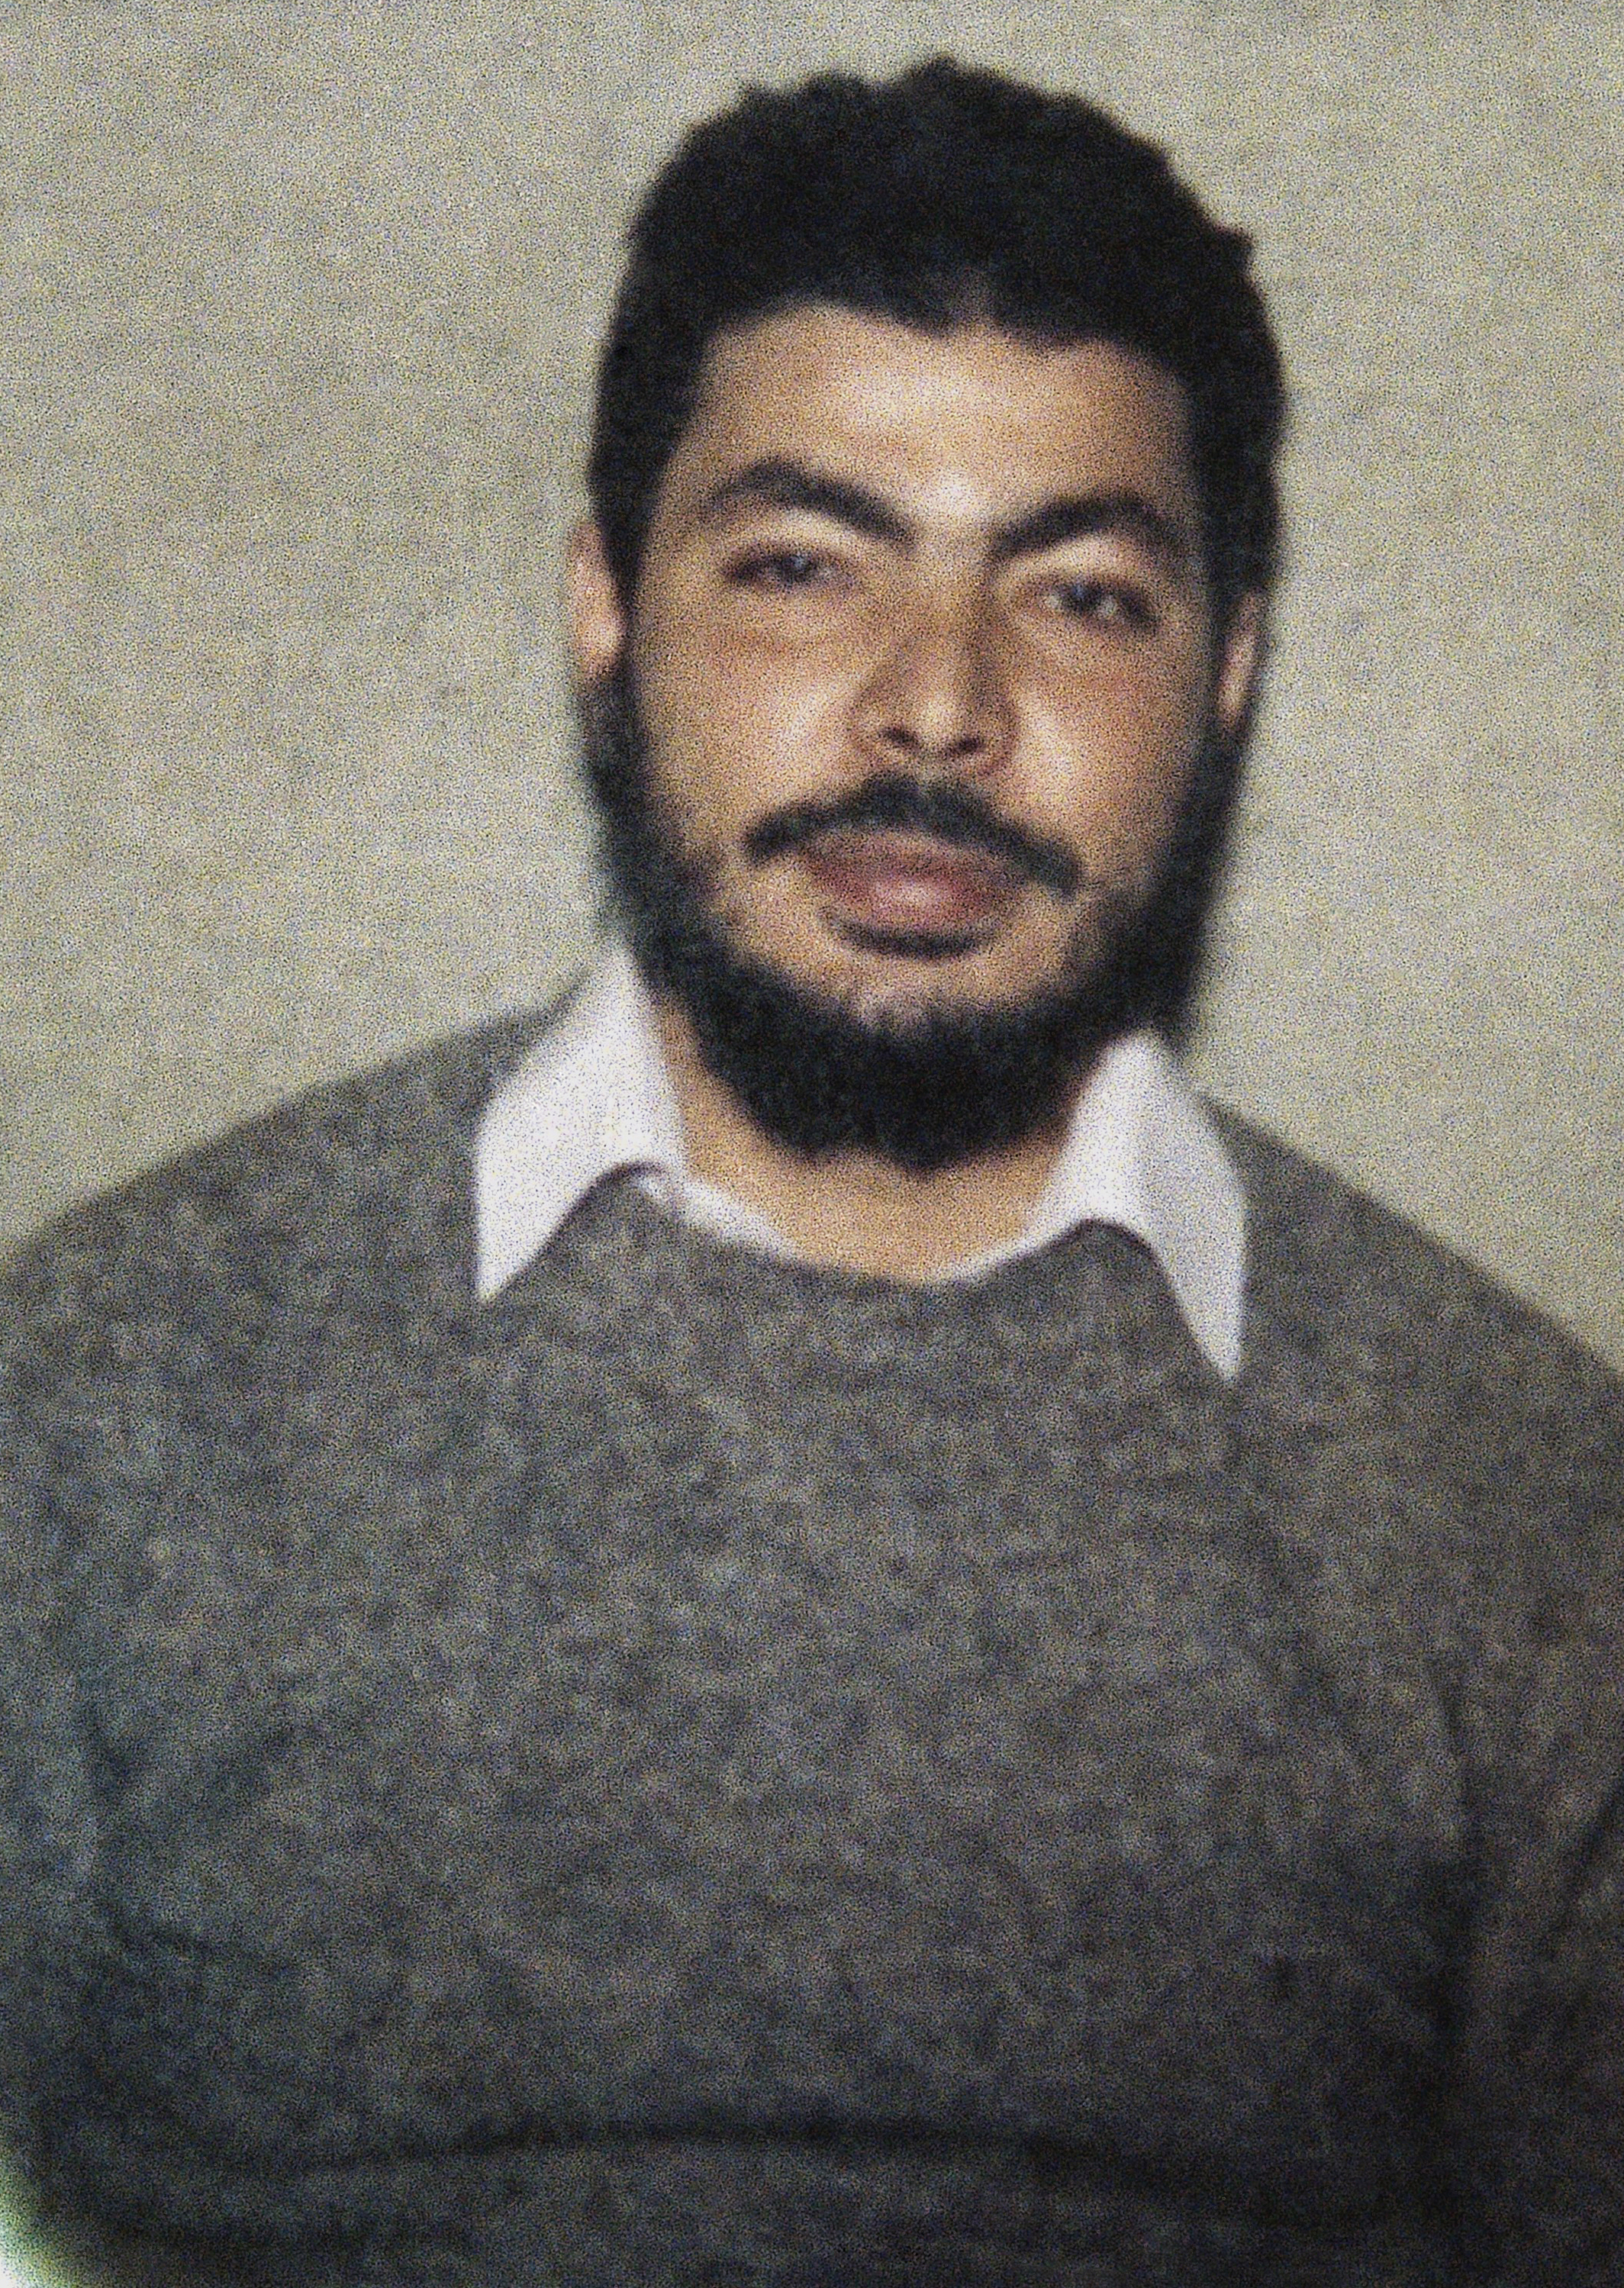 El-Sayyid A. Nosair, alleged assassin of Rabbi Meir Kahane. Nosair was charged with murder. (AP)